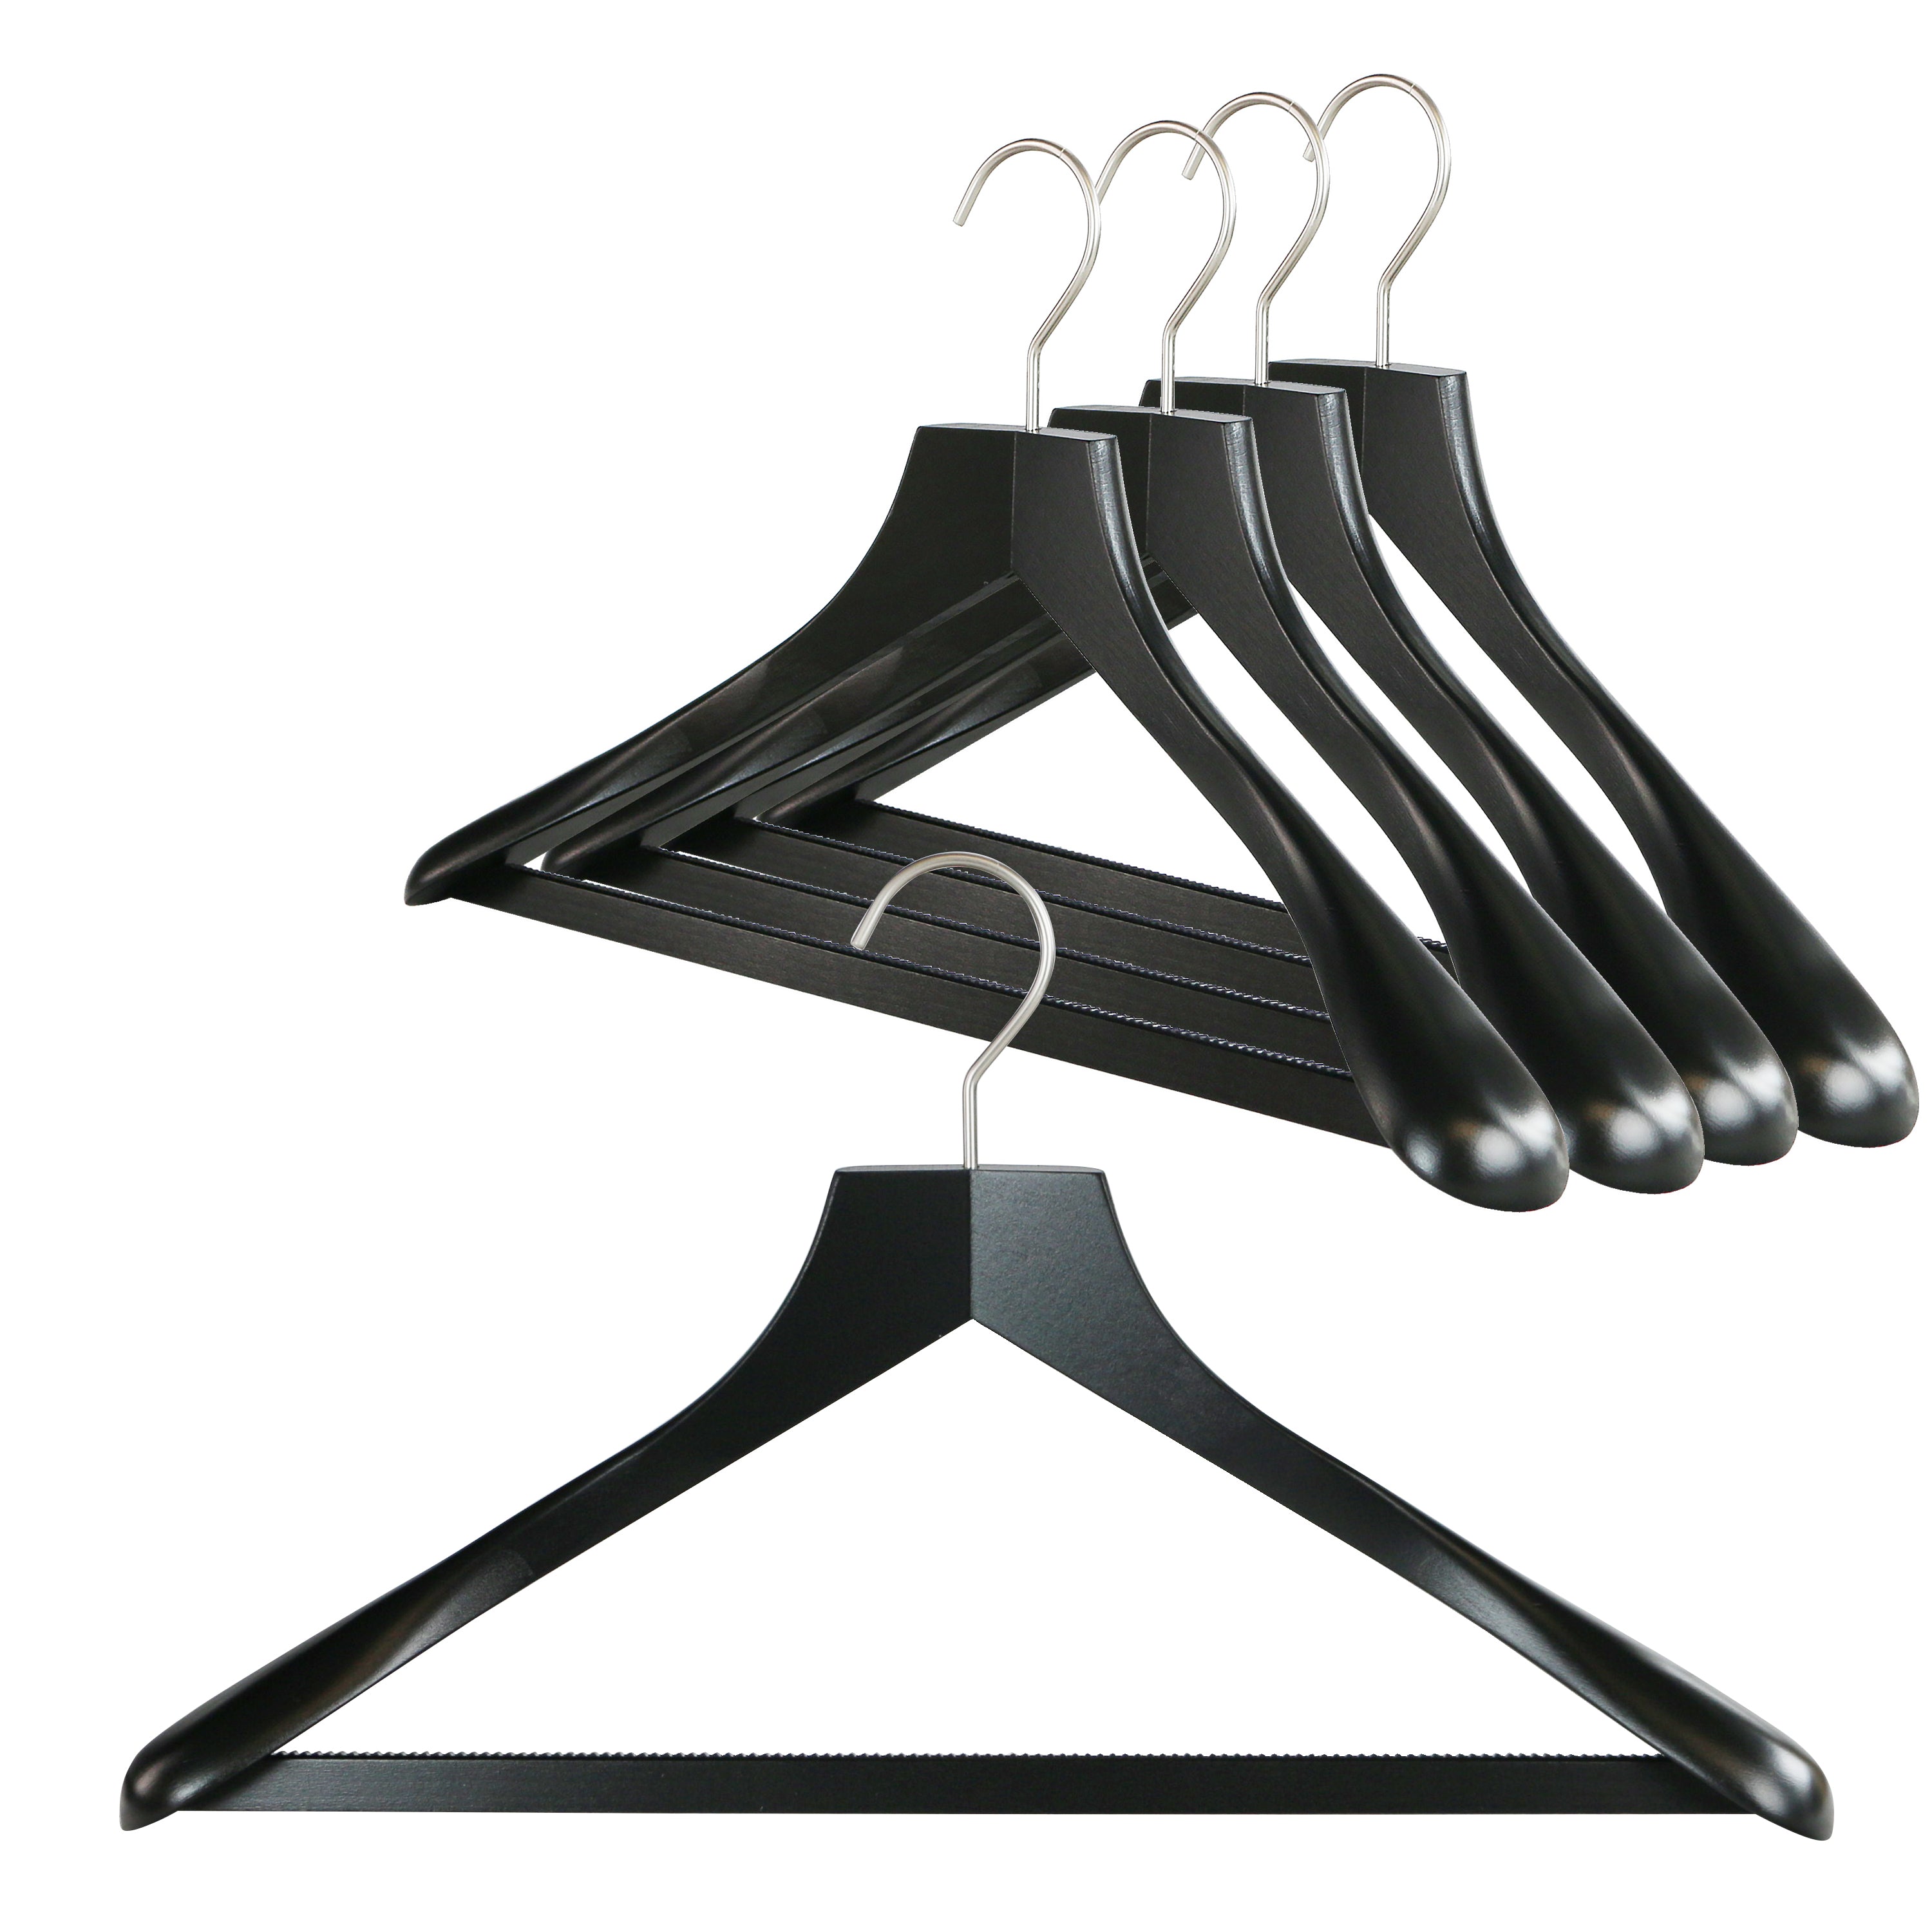 Ganpati Hangers Wooden Suit Hangers with Bar to Keep Pants Straight Crease  Free, Swivel Hook, Pack of 6 : Amazon.in: Home & Kitchen